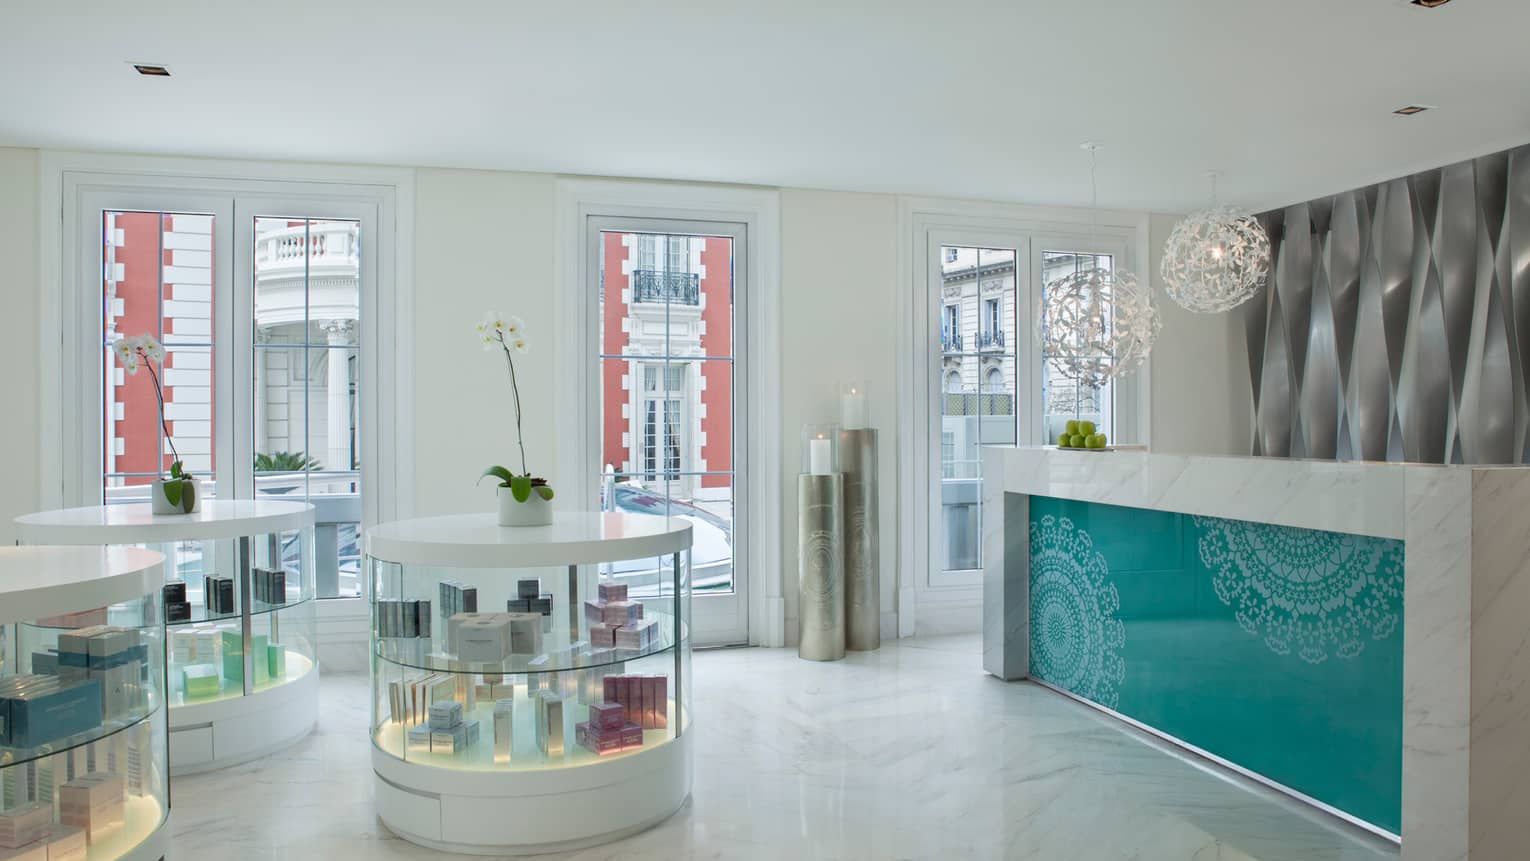 White marble spa lobby with round glass display cabinets, desk with teal pattern, white lamp